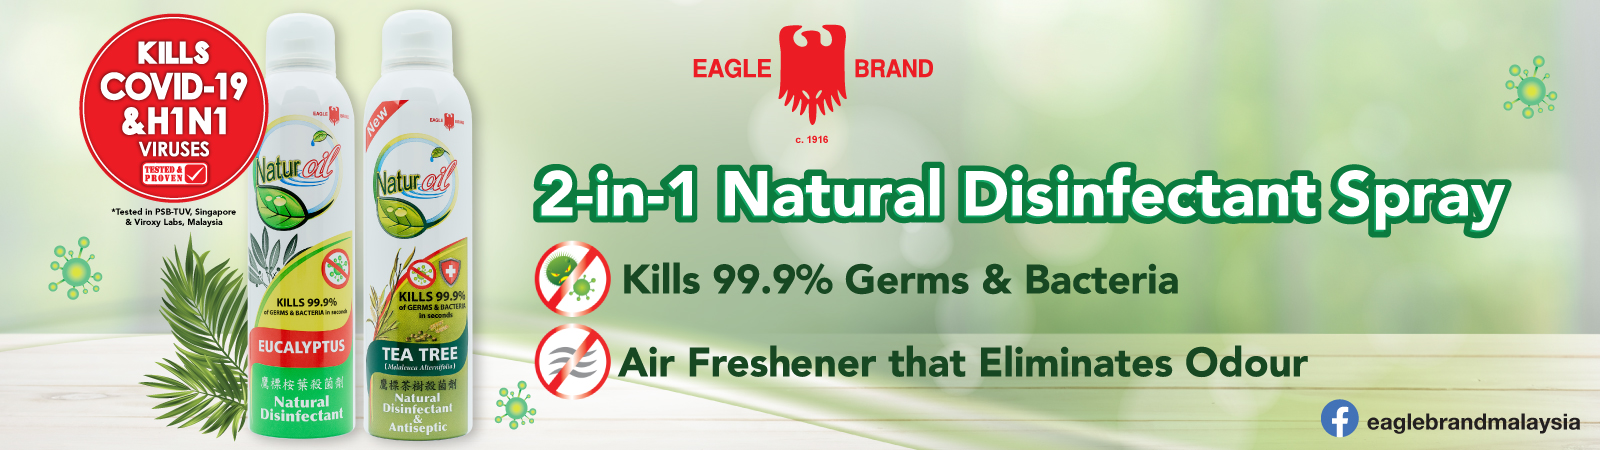 Eagle Brand Natural Disinfectant Spray